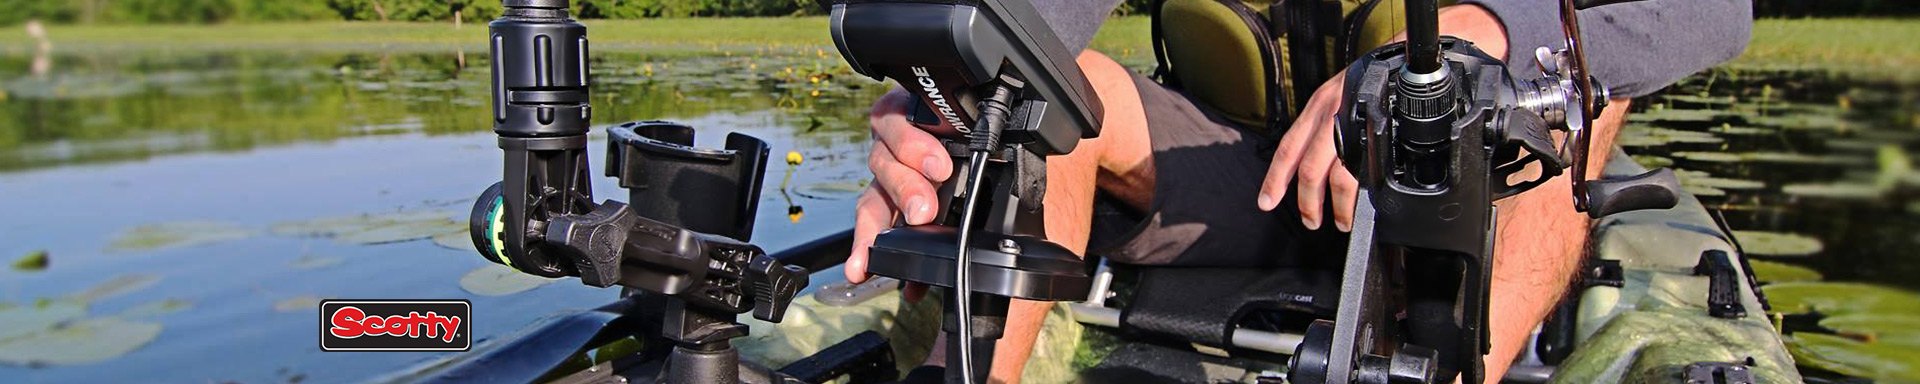 Scotty™  Downriggers, Rod Holders, Mounts, Boat Accessories